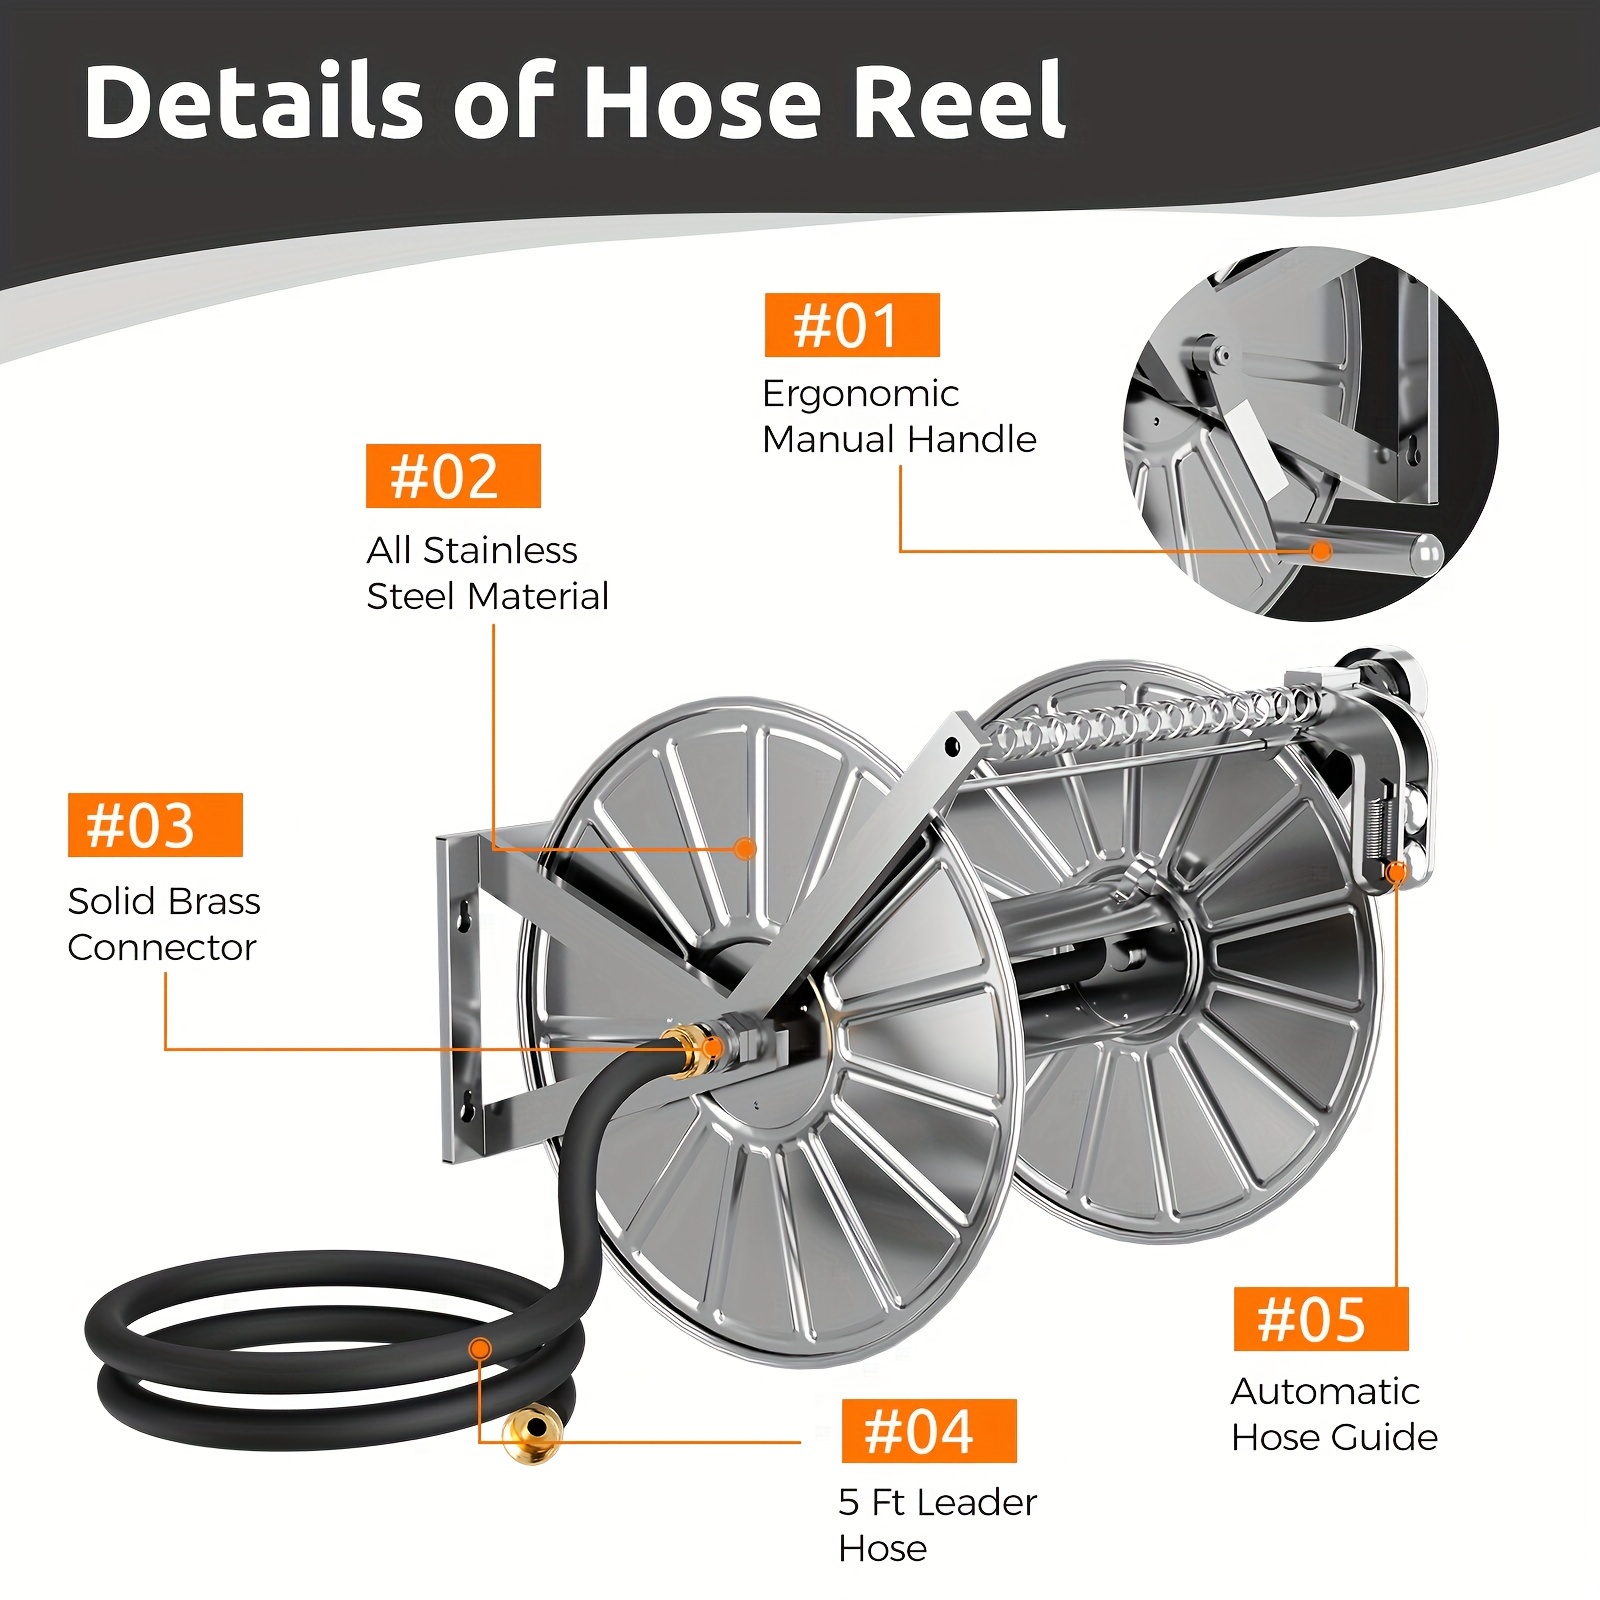 

Efurden Stainless Steel Garden Hose Reel With 5 Ft Leader Hose, Heavy Duty And Large Capacity Metal Water Hose Reel Wall Mount With Crank Handle